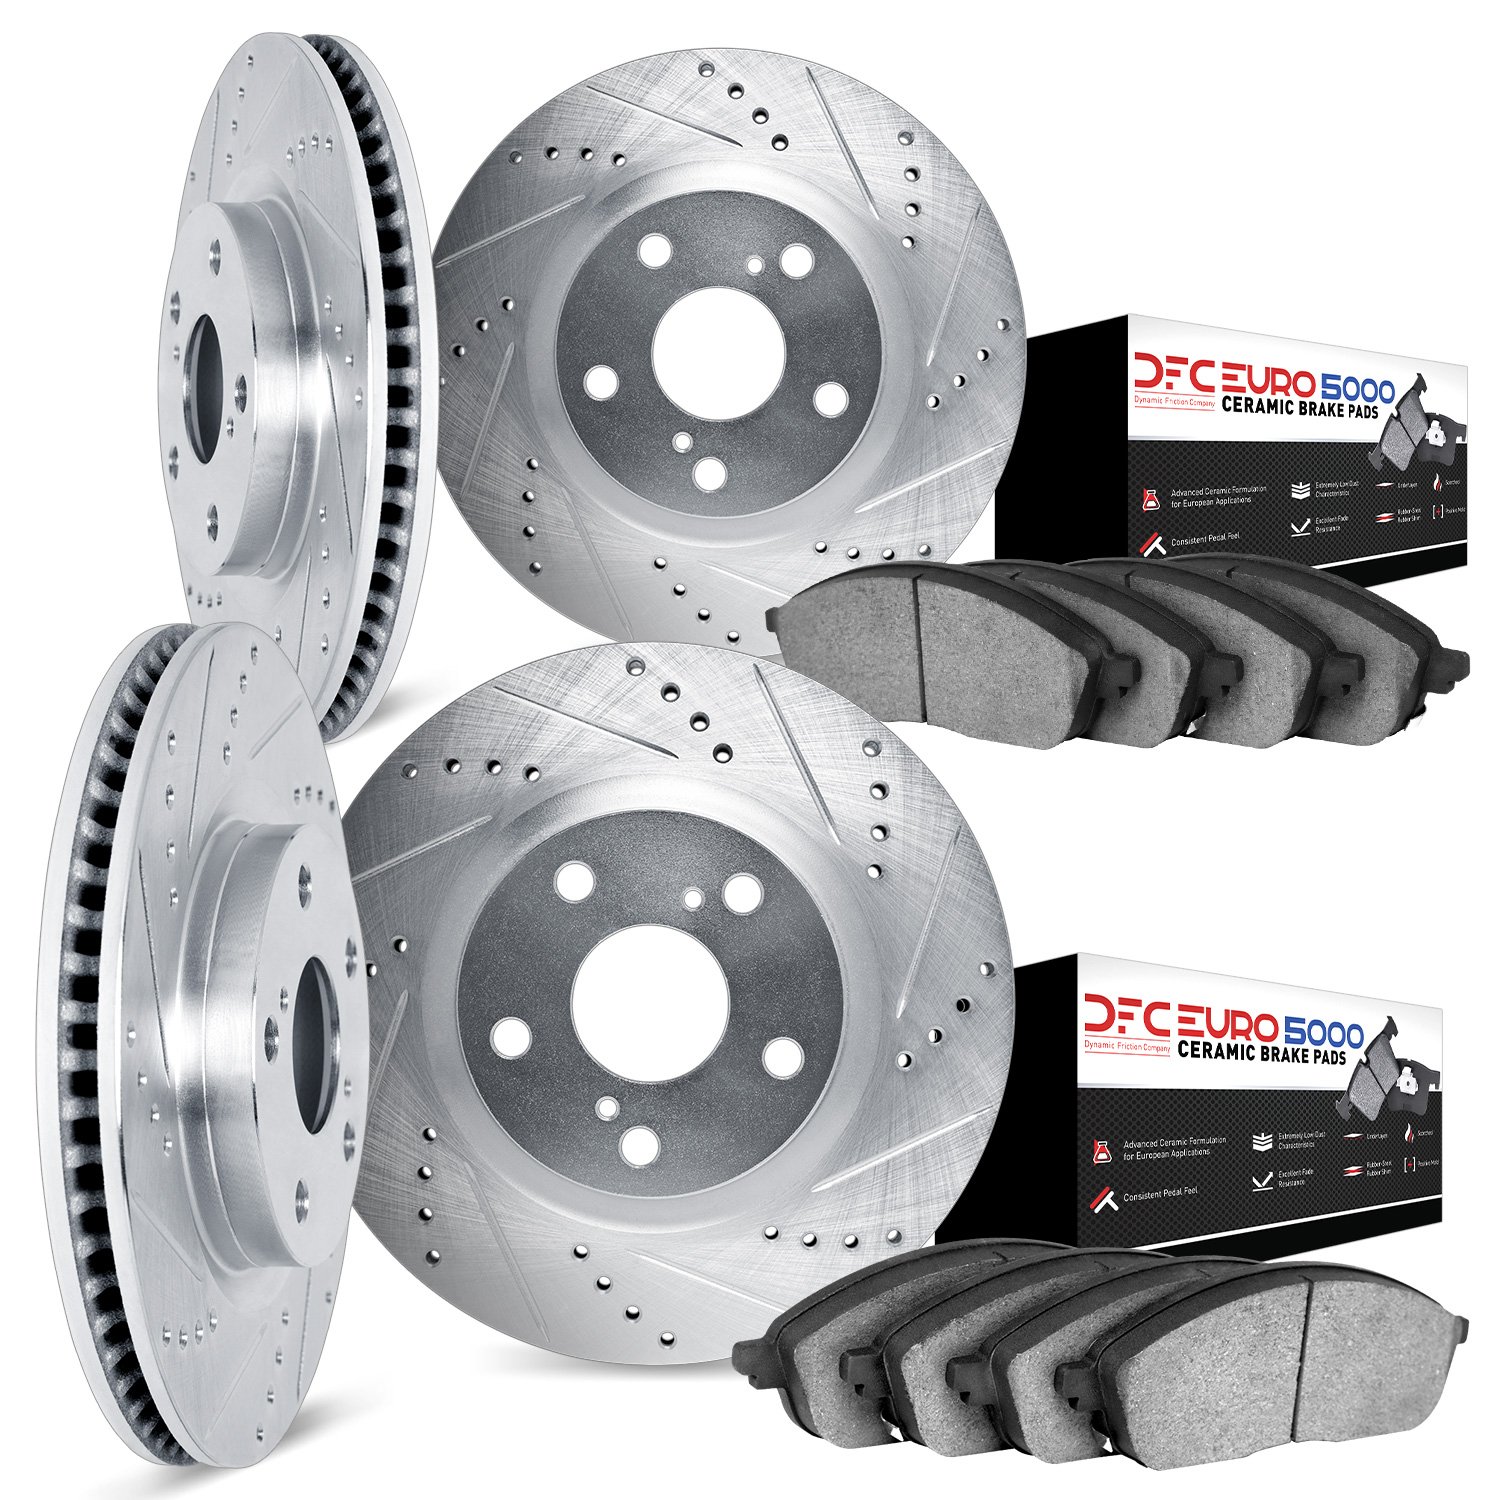 7604-31016 Drilled/Slotted Brake Rotors w/5000 Euro Ceramic Brake Pads Kit [Silver], 2000-2003 BMW, Position: Front and Rear